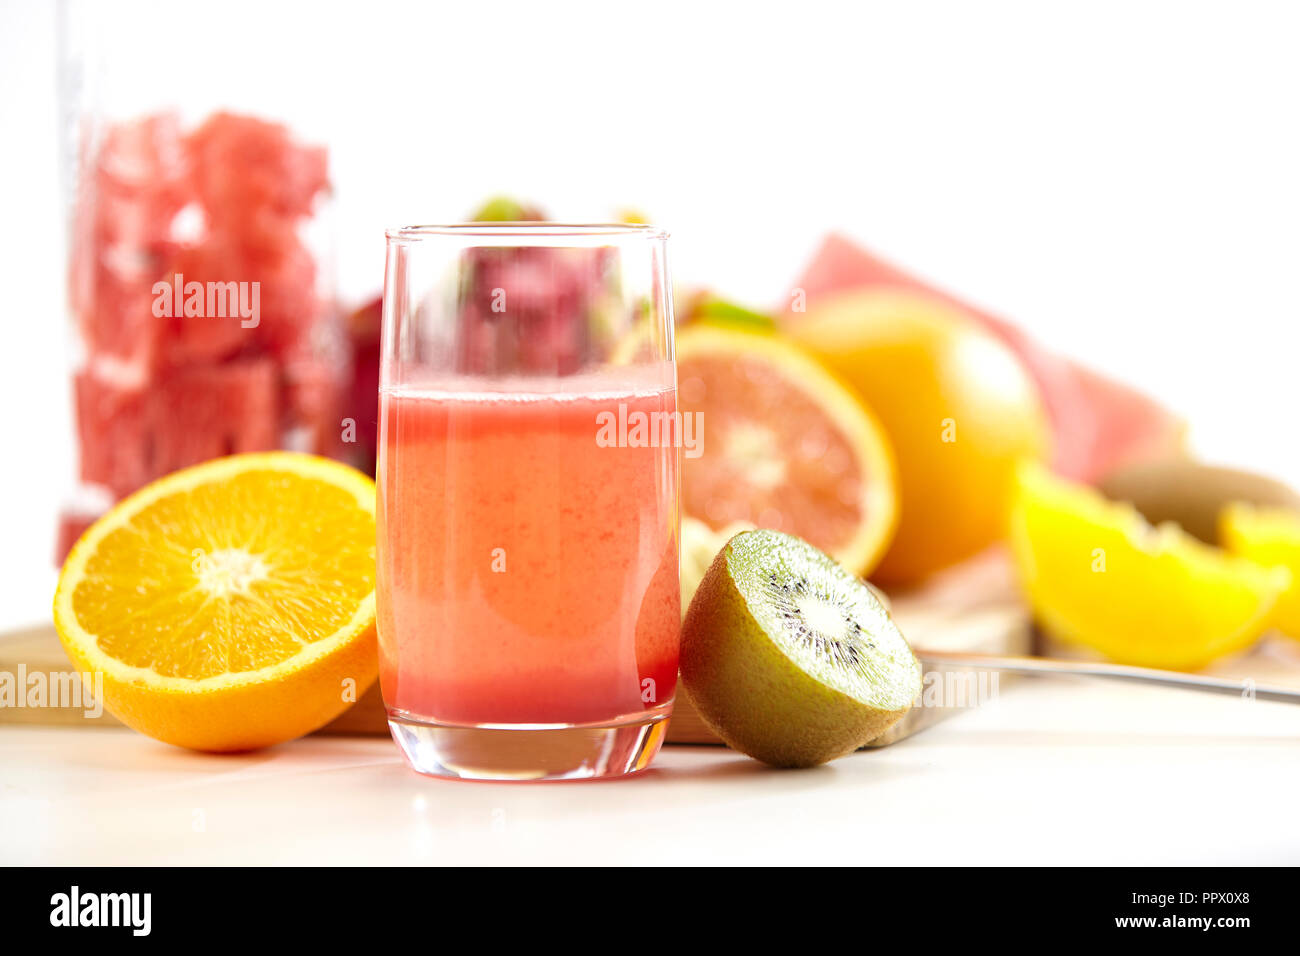 a glass of juice made from fresh fruits isolated on white background. Stock Photo